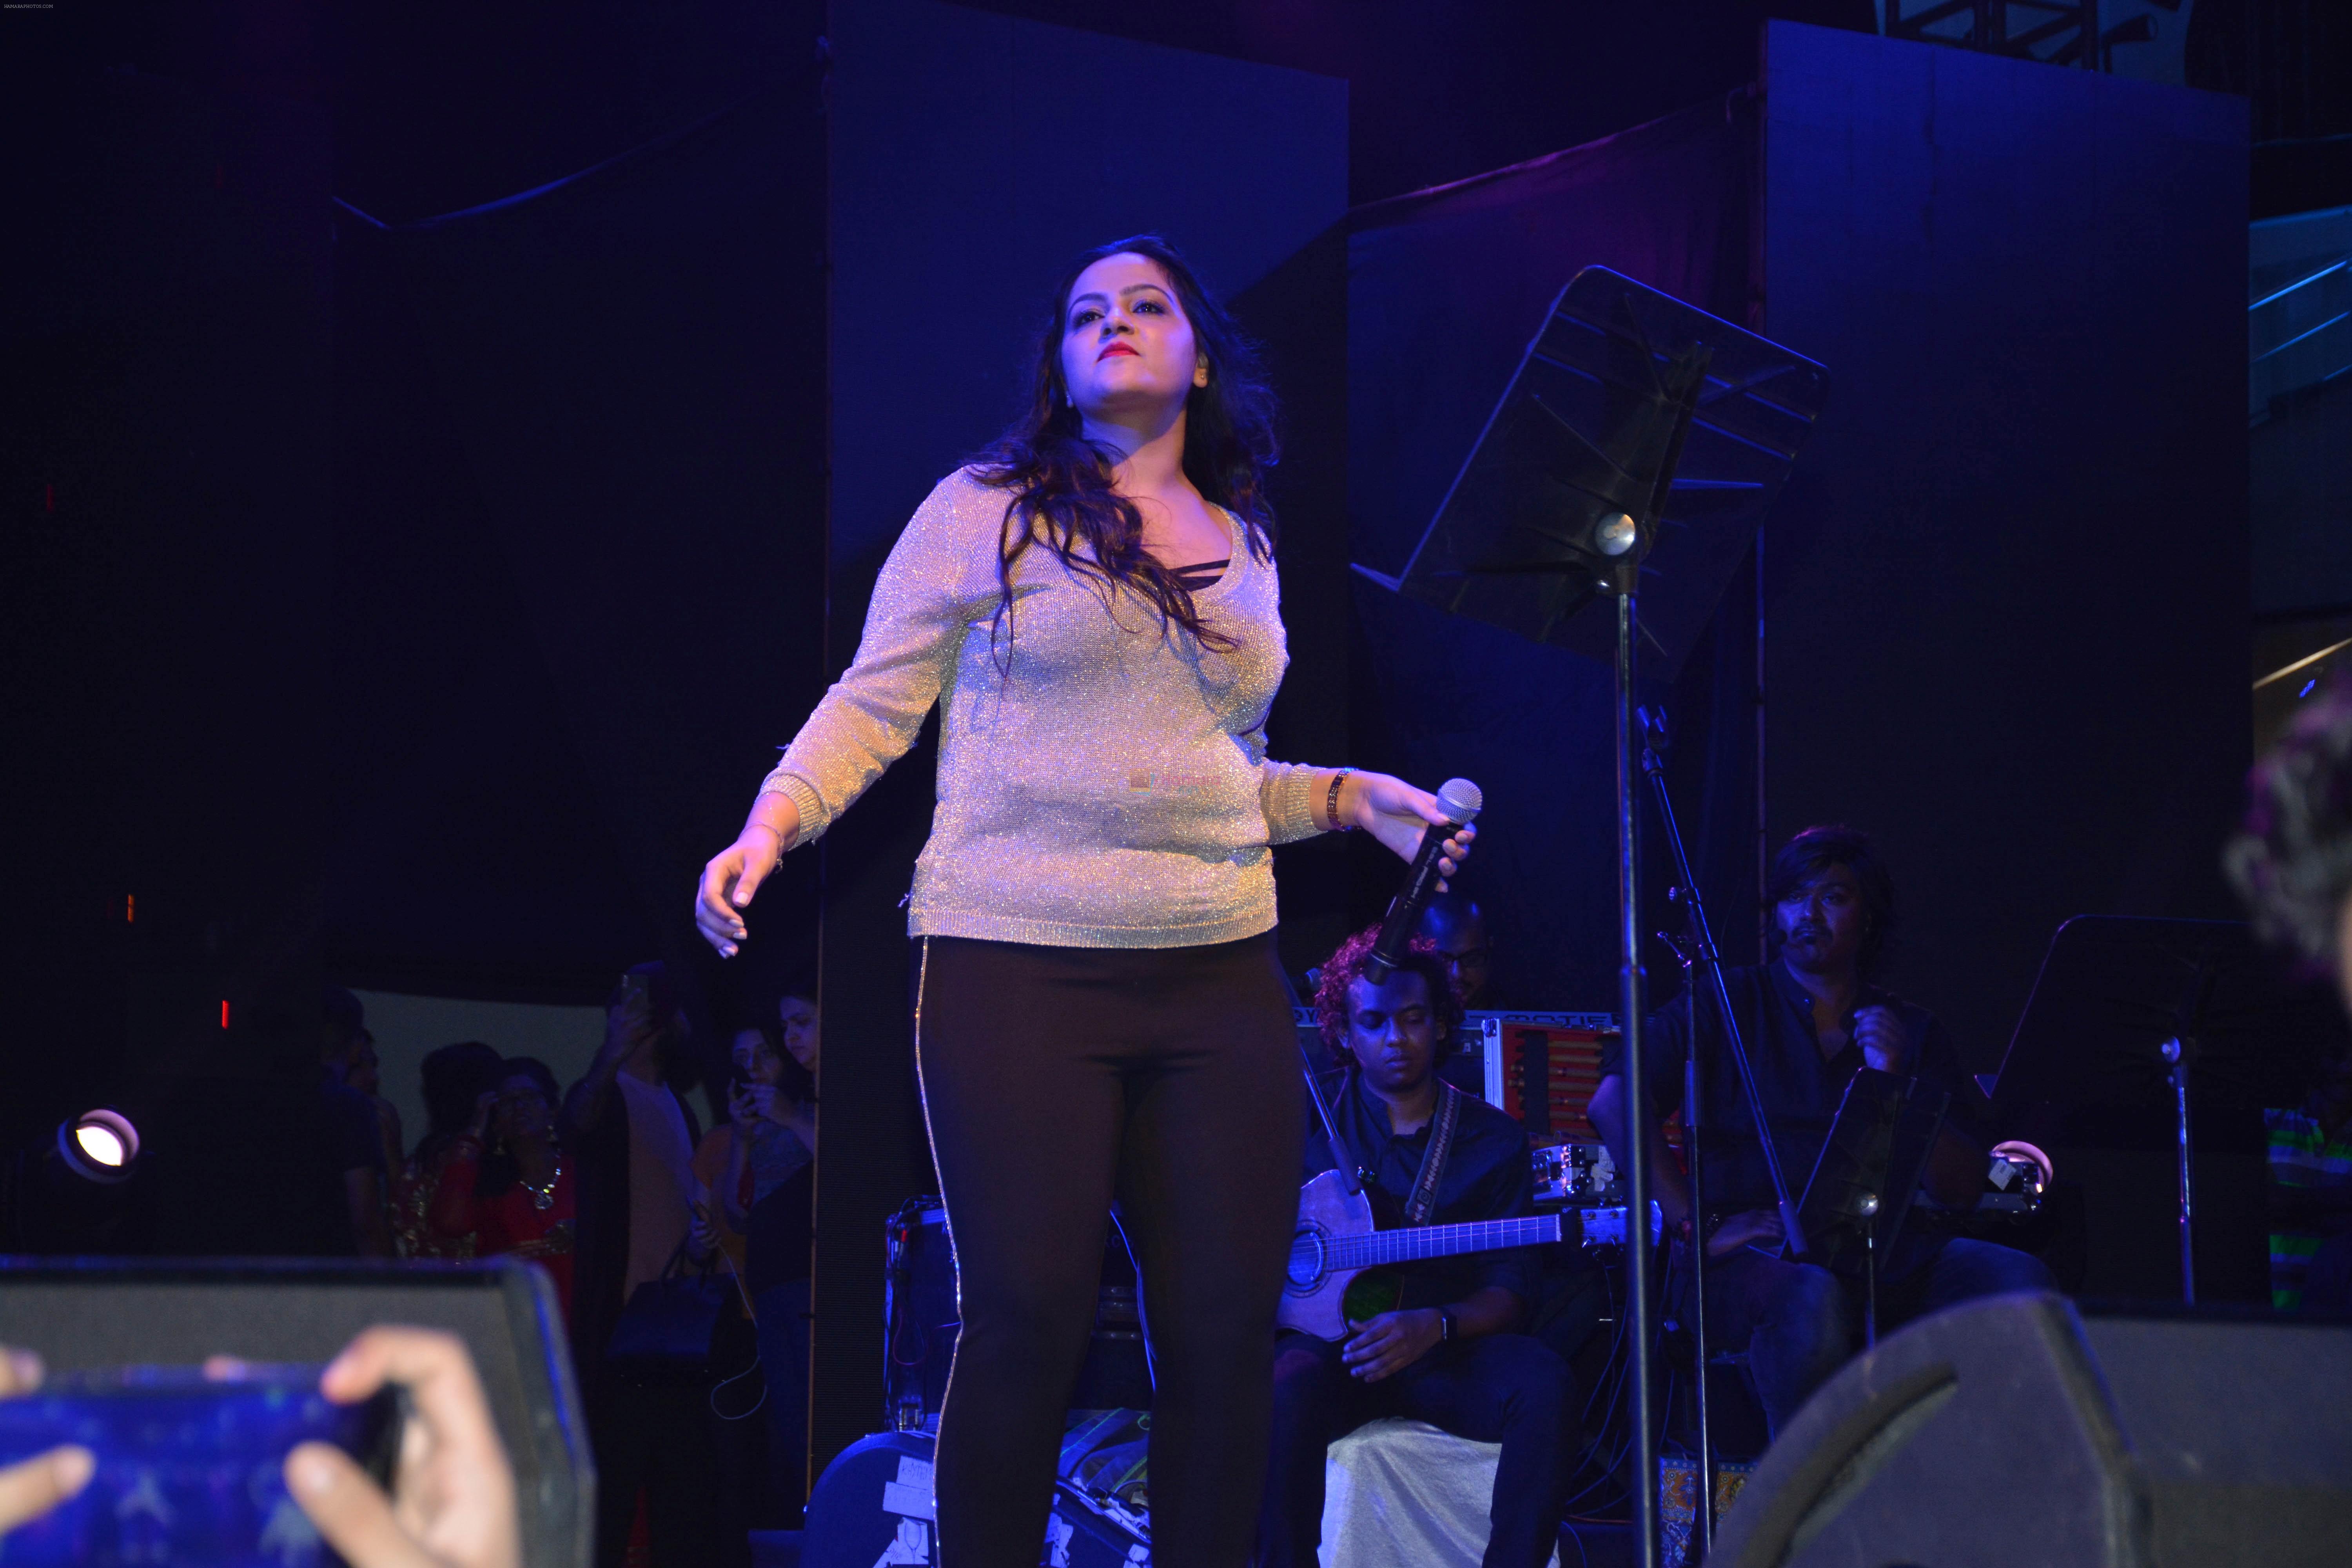 at Manmarziyaan Music Concert in NM College In Juhu on 19th Aug 2018